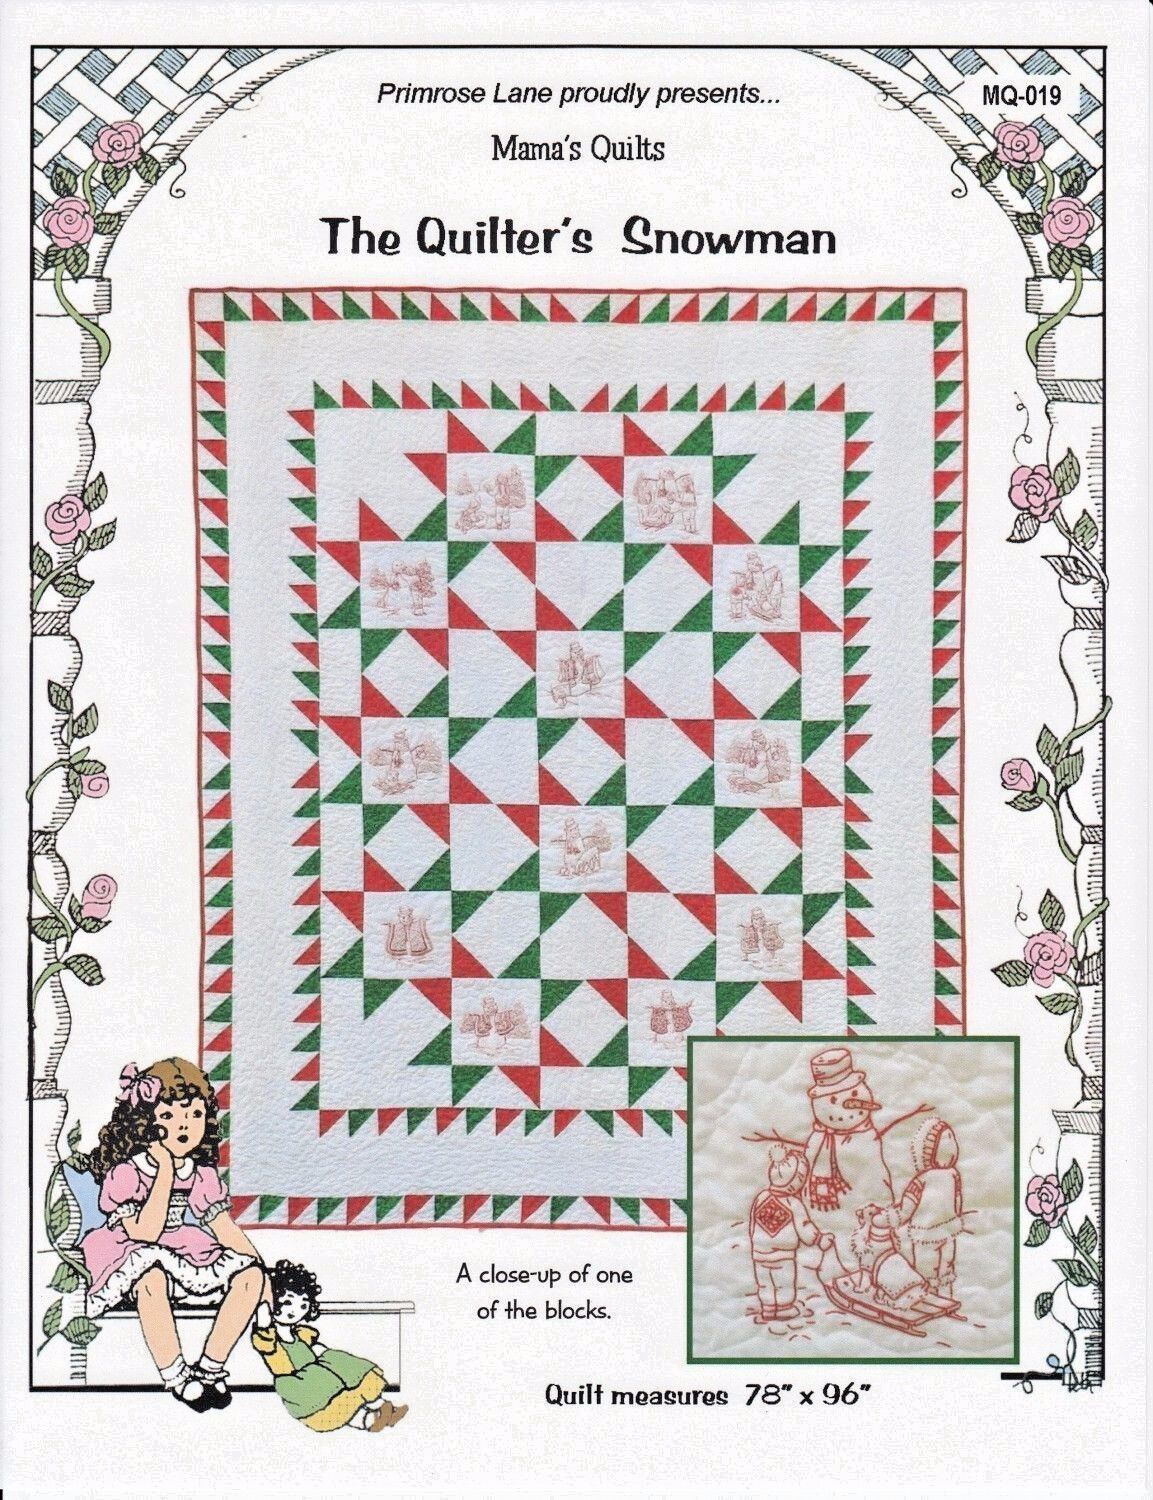 Quilter's Snowman Quilt Hand Embroidered Quilt Pattern, By Primrose Lane